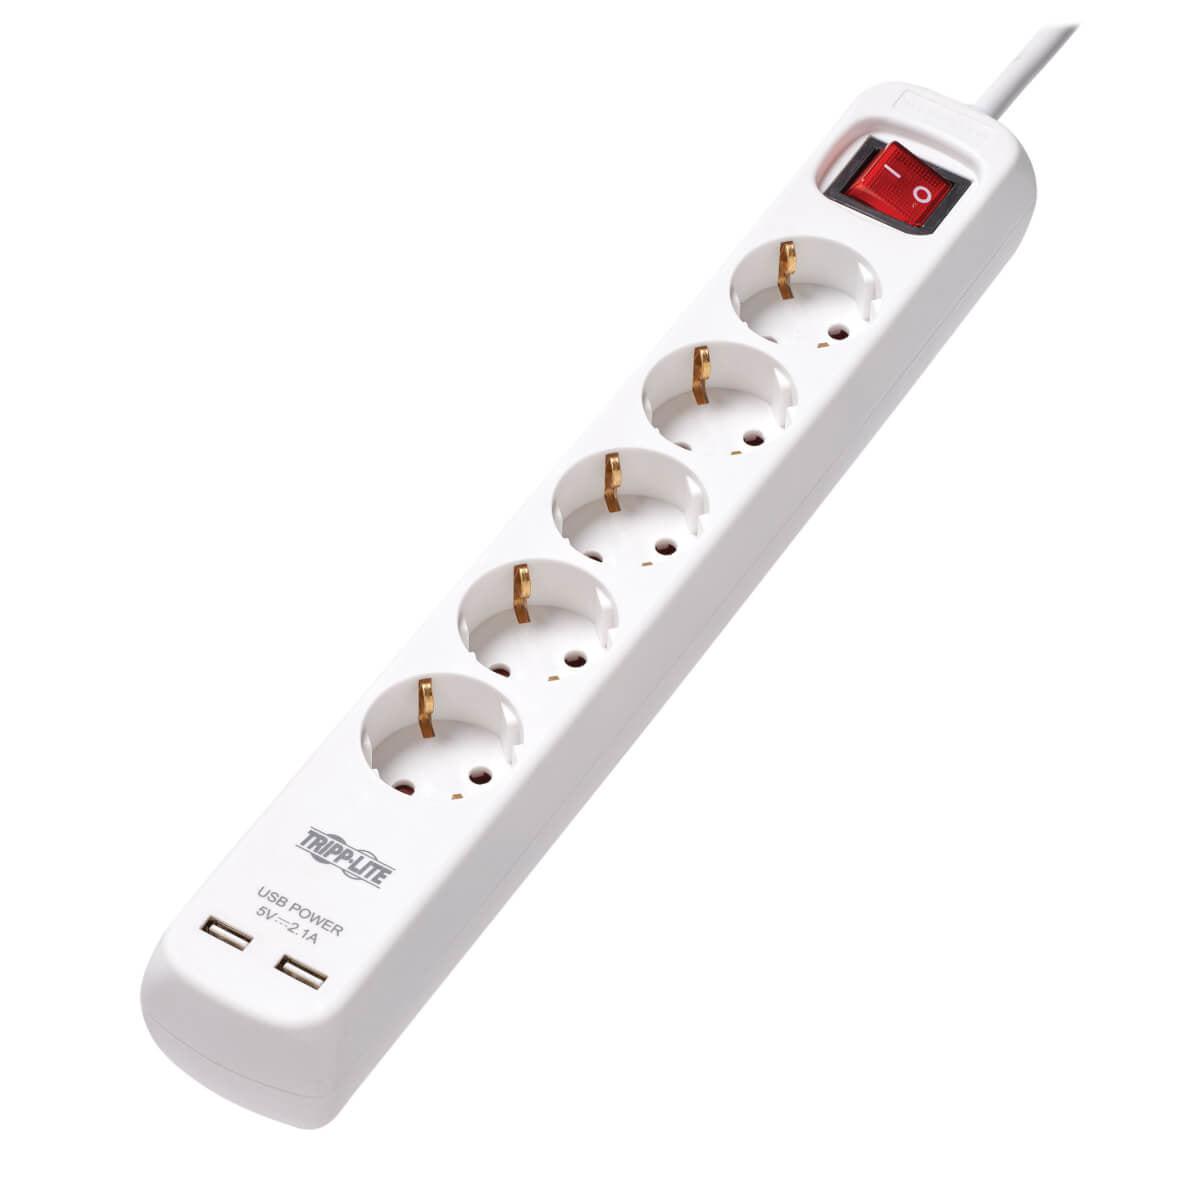 Tripp Lite Ps5G3Usb 5-Outlet Power Strip With Usb-A Charging - Schuko Outlets, 220-250V, 16A, 3 M Cord, Schuko Plug, White